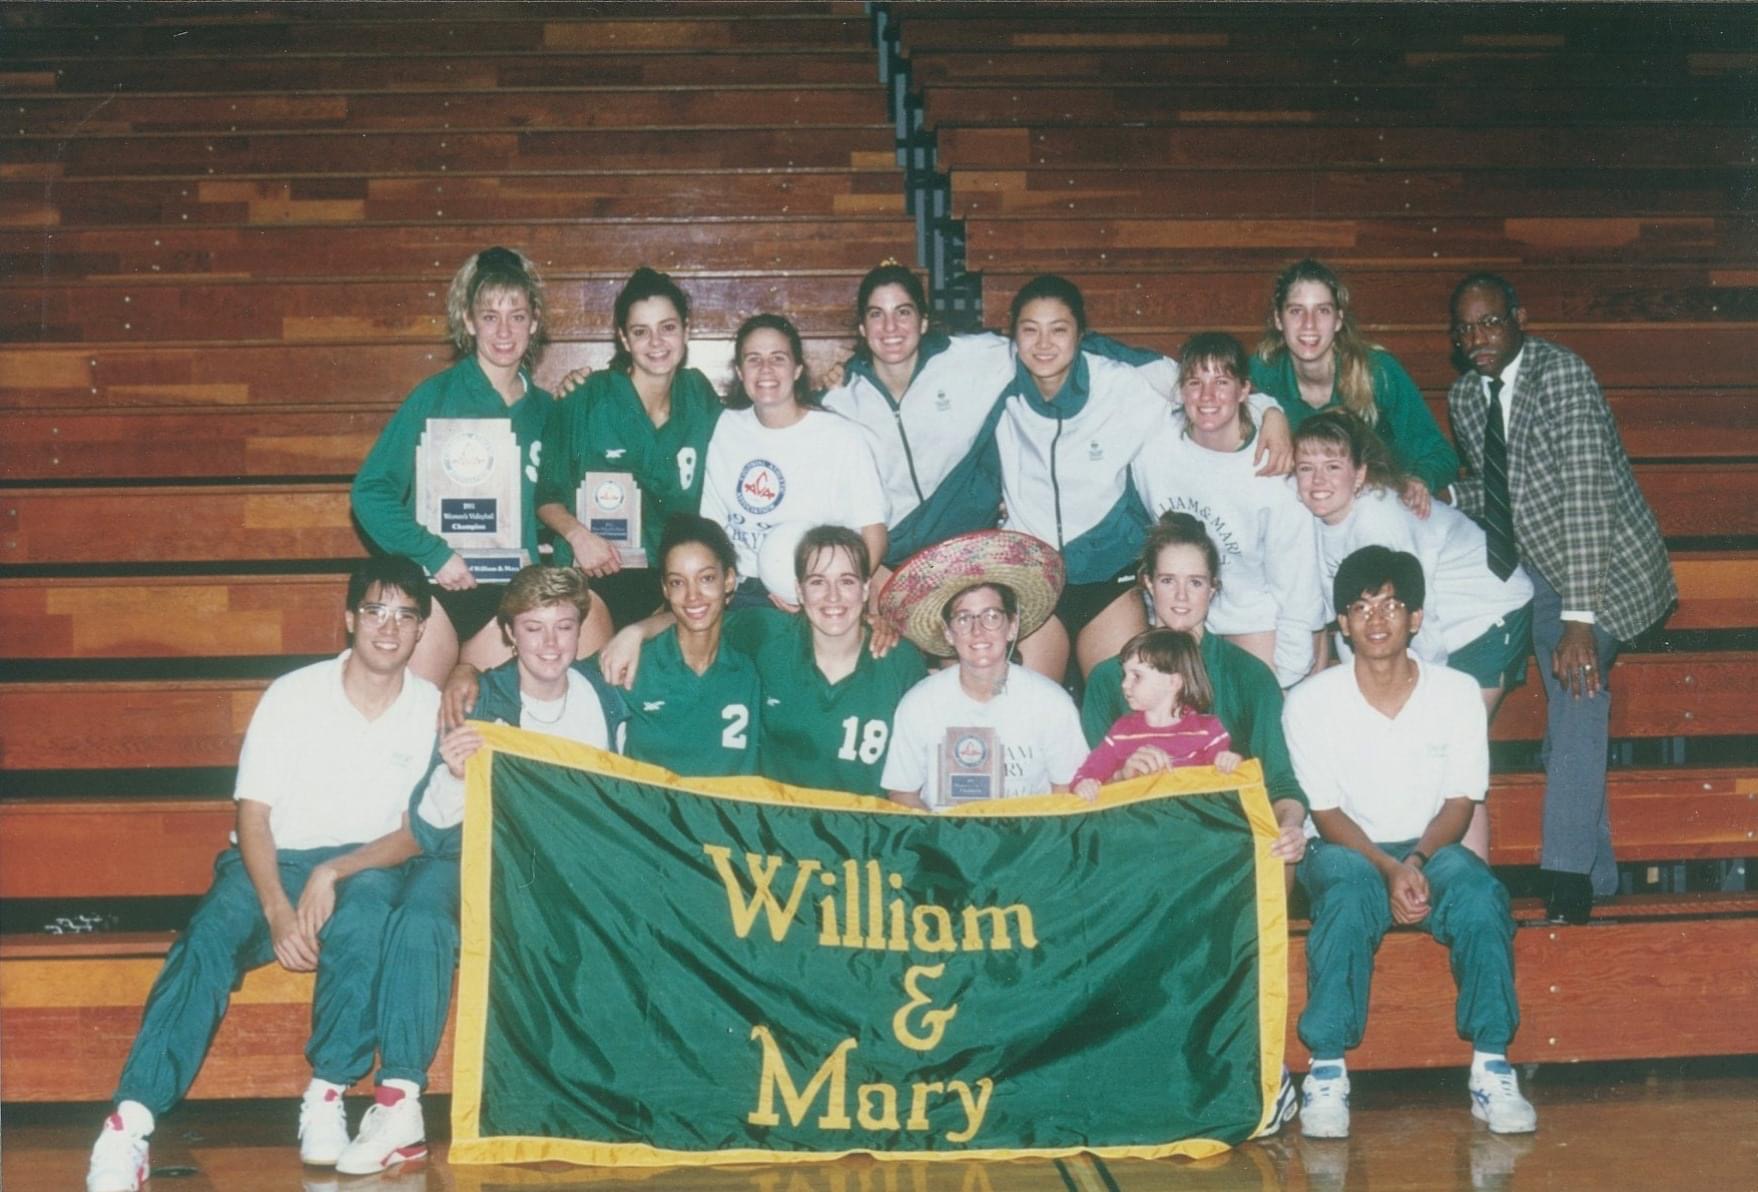 Jones (first row, second from the right) with the William & Mary women’s volleyball team in 1991